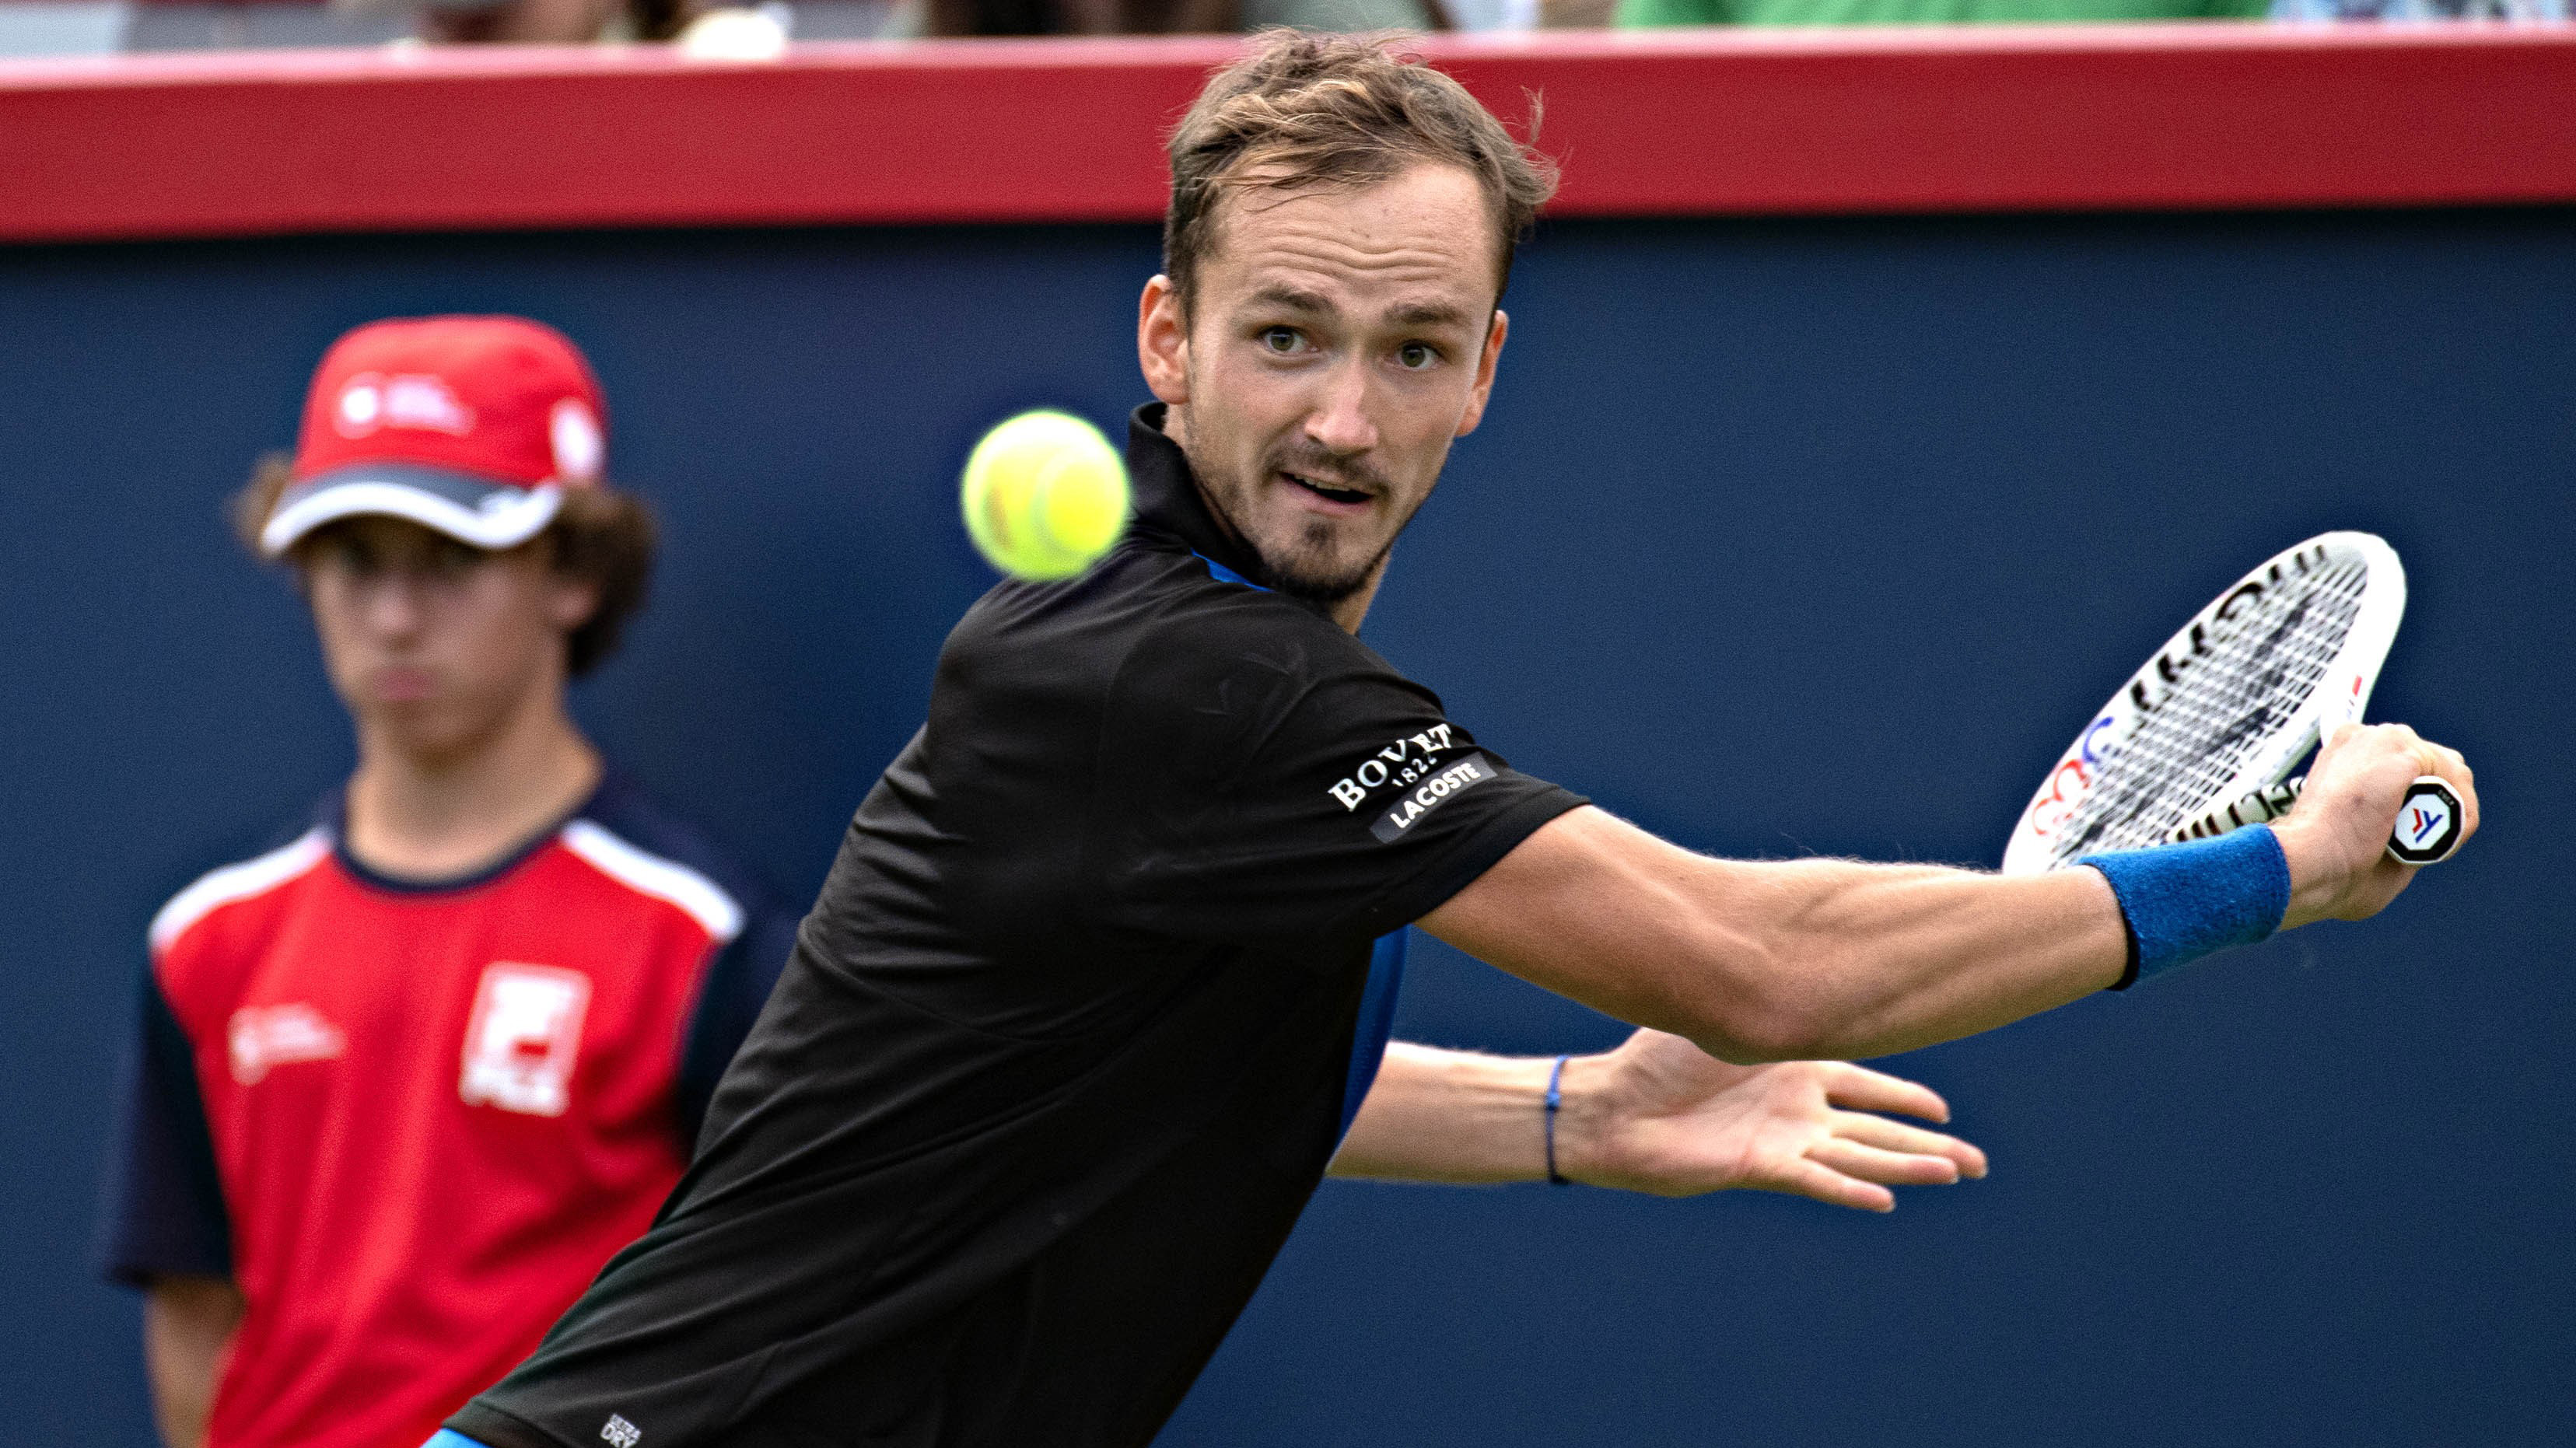 Daniil Medvedev competes during the men's singles second round match between Daniil Medvedev of Russia and Nick Kyrgios of Australia at the 2022 National Bank Open tennis tournament at the IGA Stadium in Montreal, Canada, on Aug. 10, 2022. (Photo by Andrew Soong/Xinhua via Getty Images)